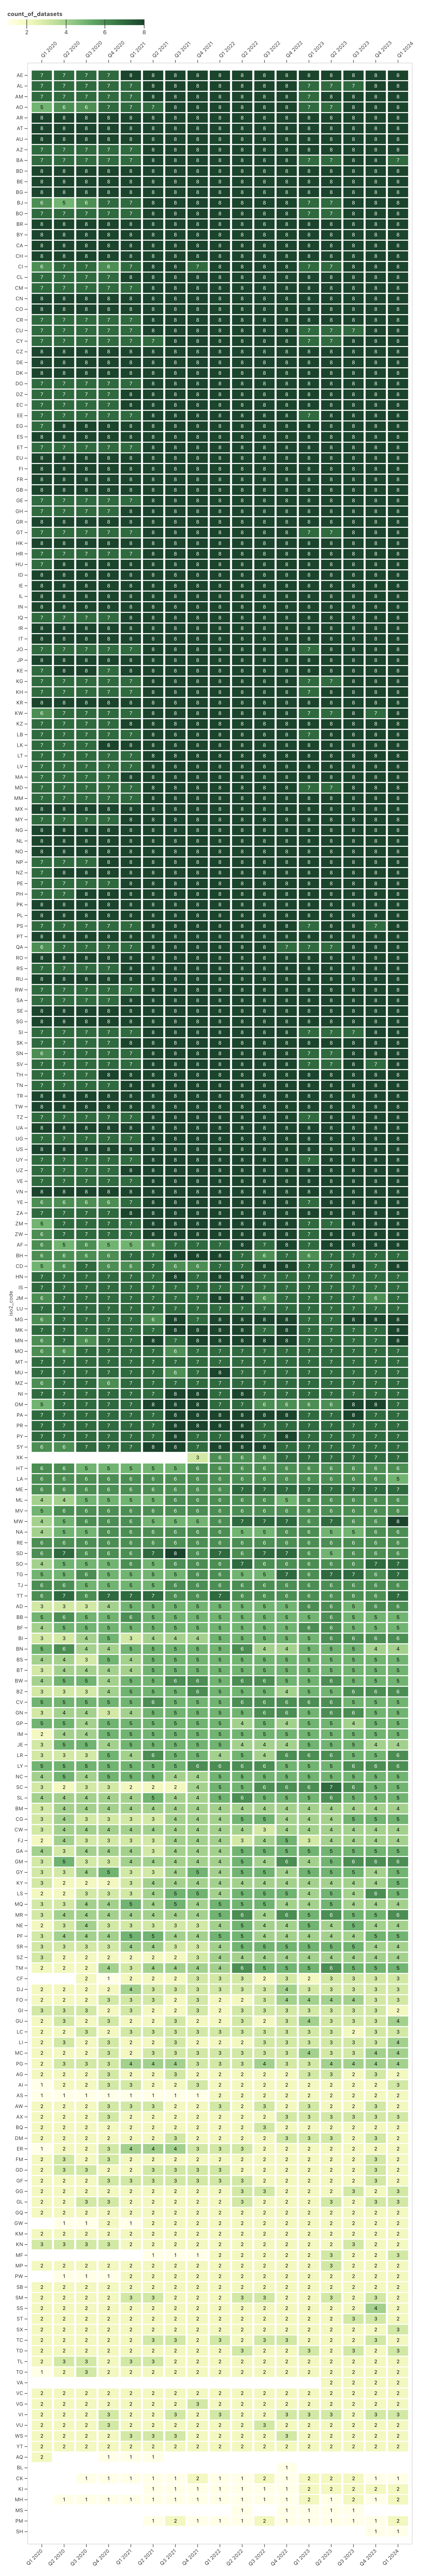 A heatmap of the count of GitHub Innovation Graph data files for each economy by quarter, which shows that the more populous economies are more likely to be represented in more data files.